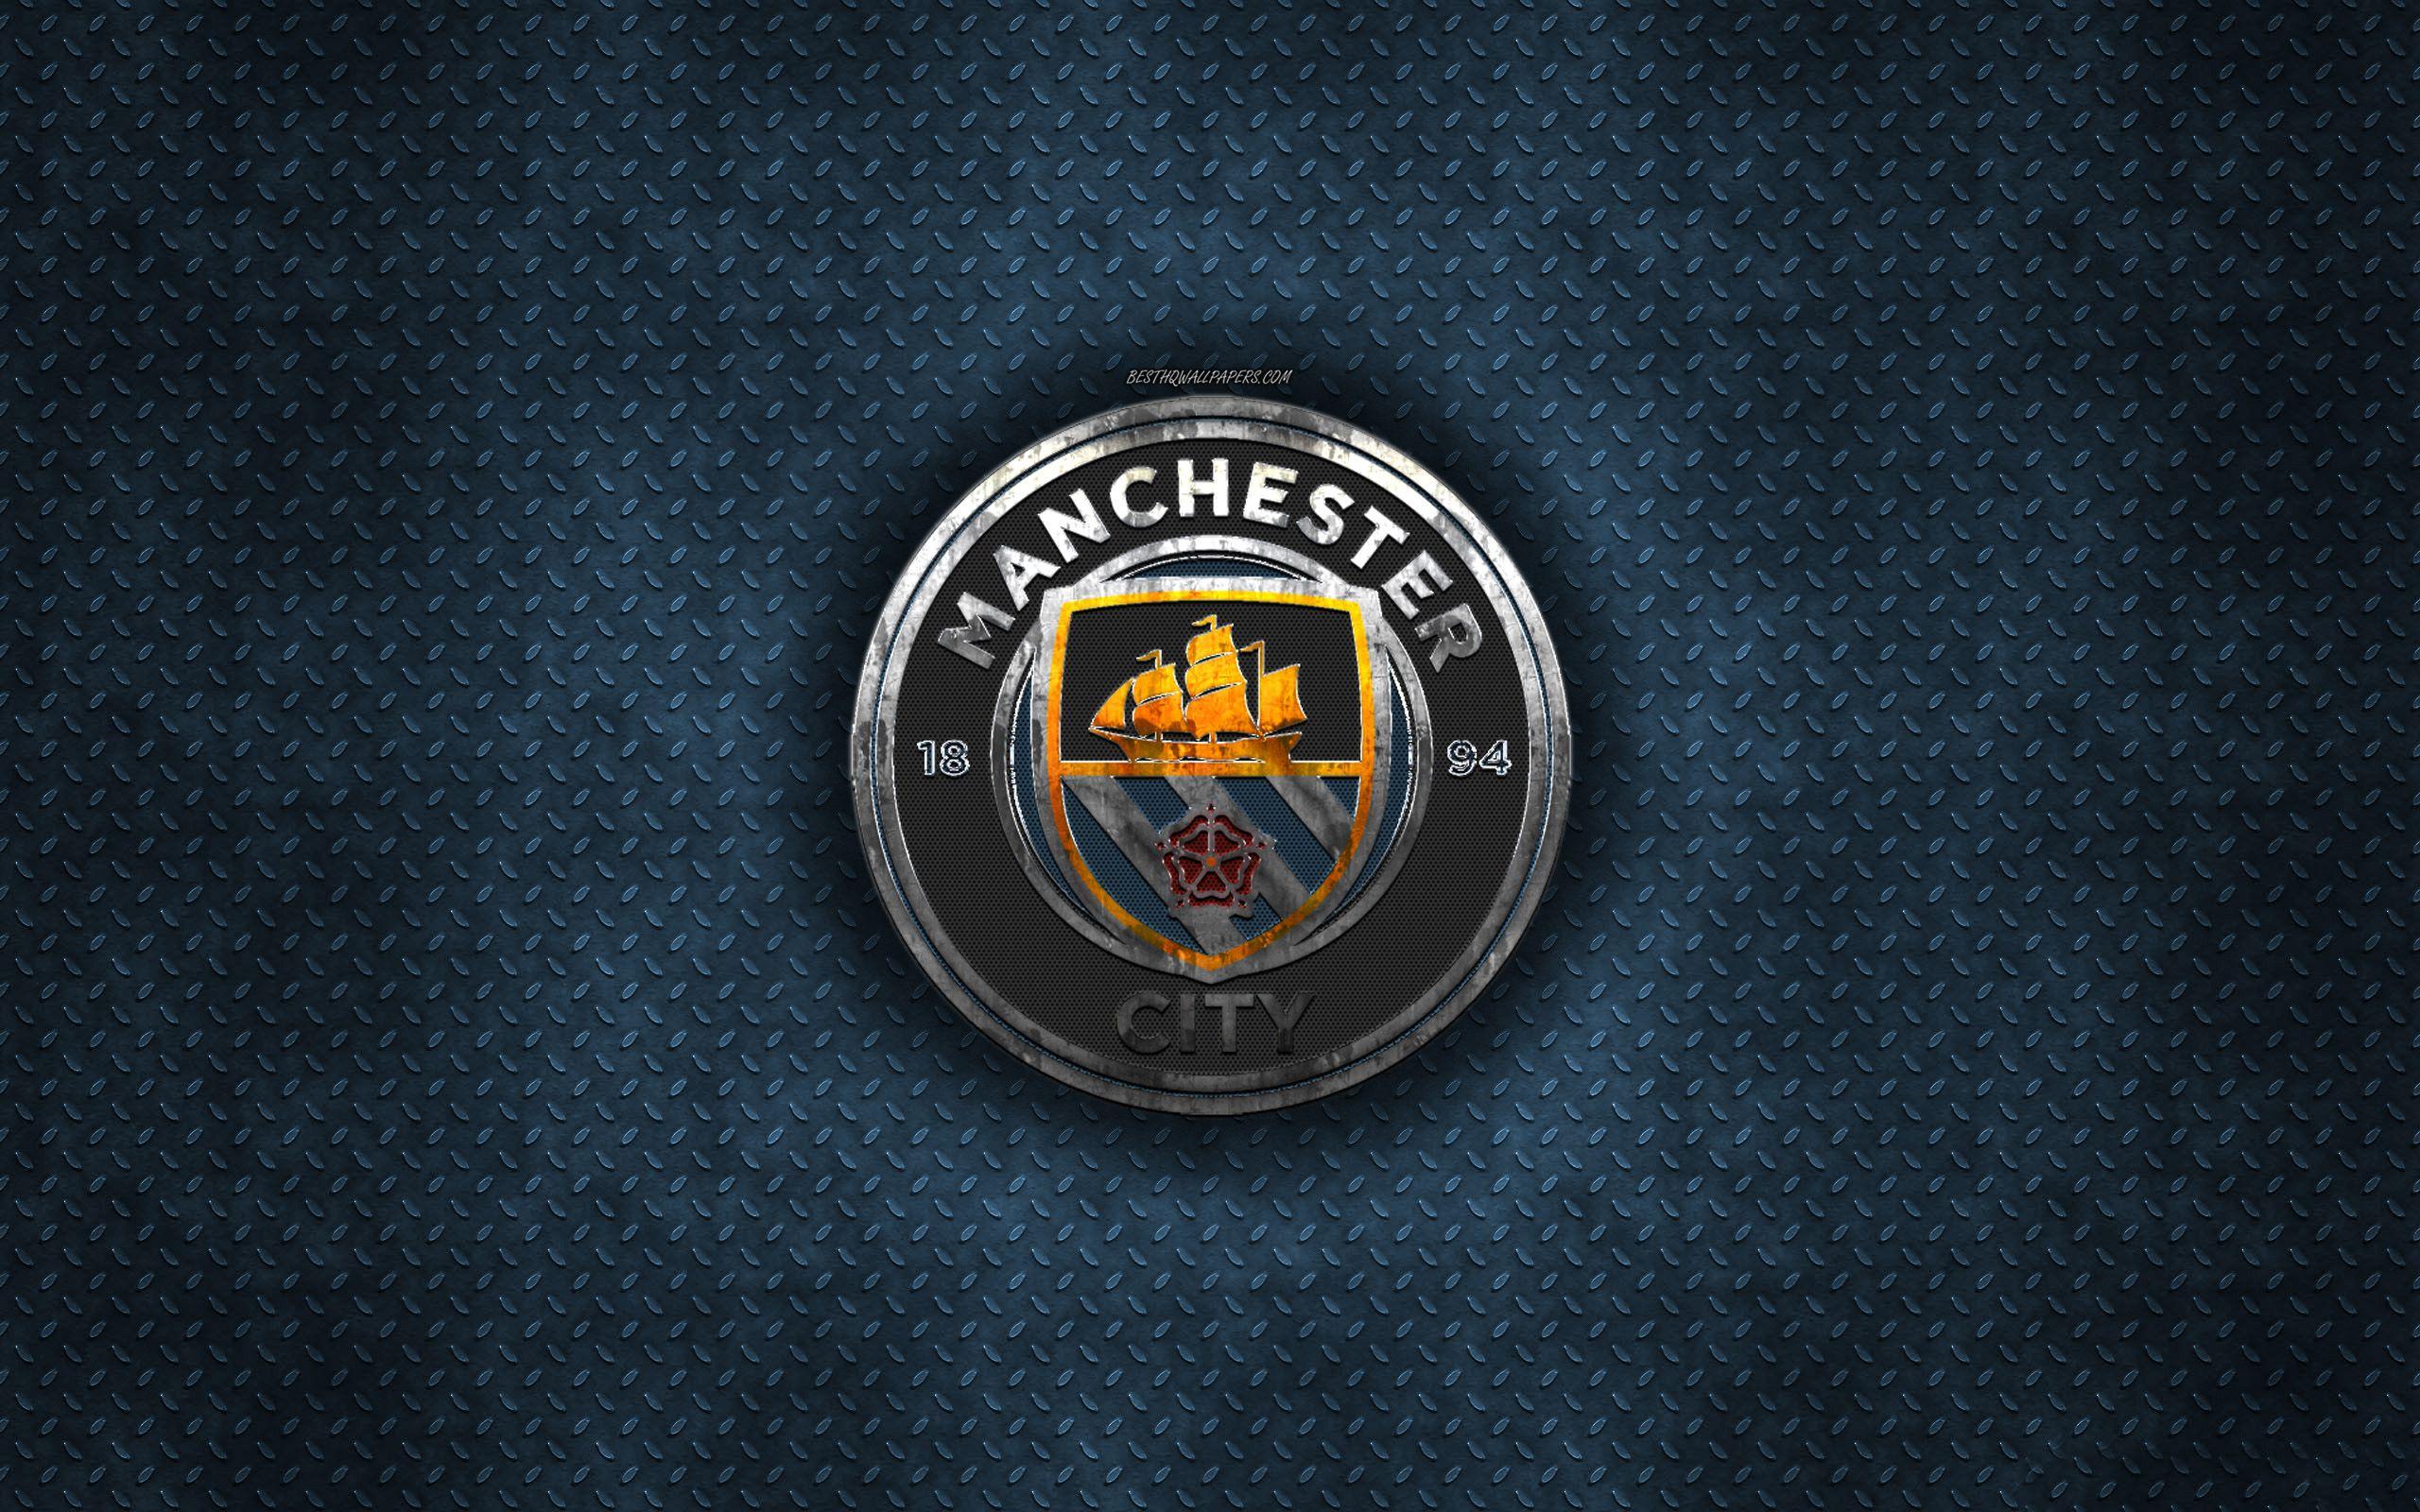 Download wallpapers Manchester City FC flag, 4k, blue and white 3D waves,  Premier League, english football club, football, Manchester City FC logo, Manchester  City FC, soccer, Man City for desktop free. Pictures